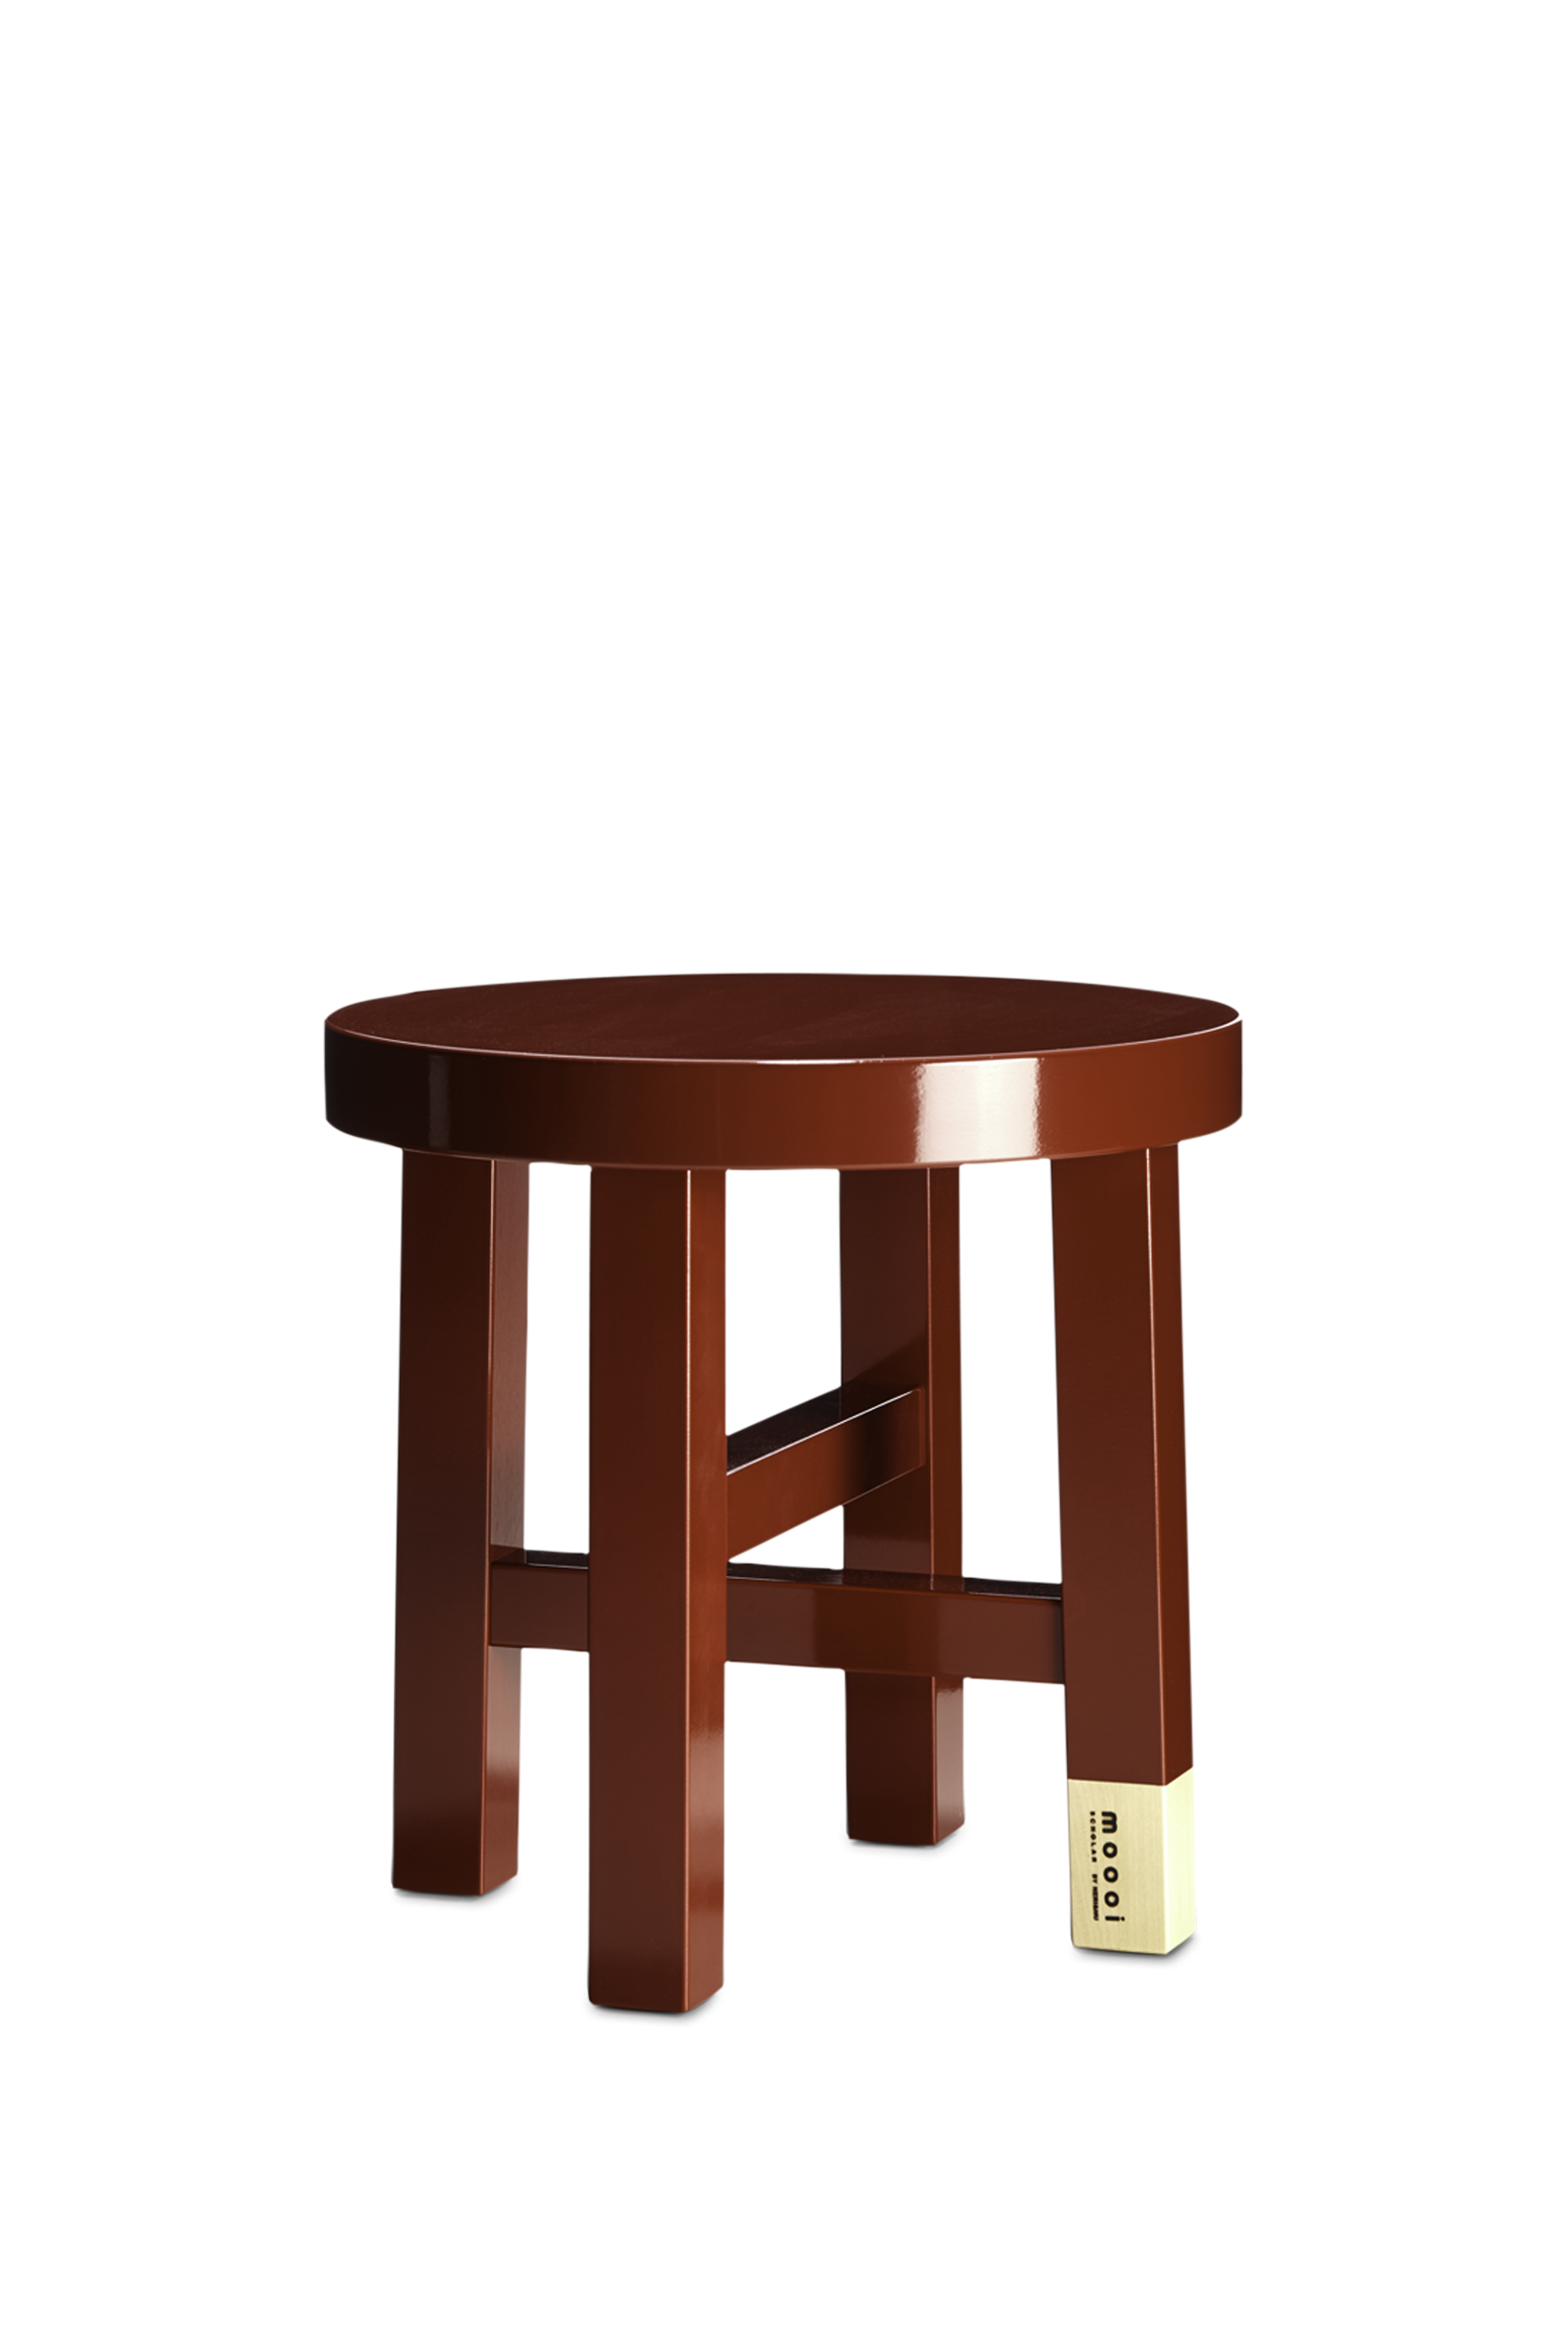 Common Comrades side table Scholar front view